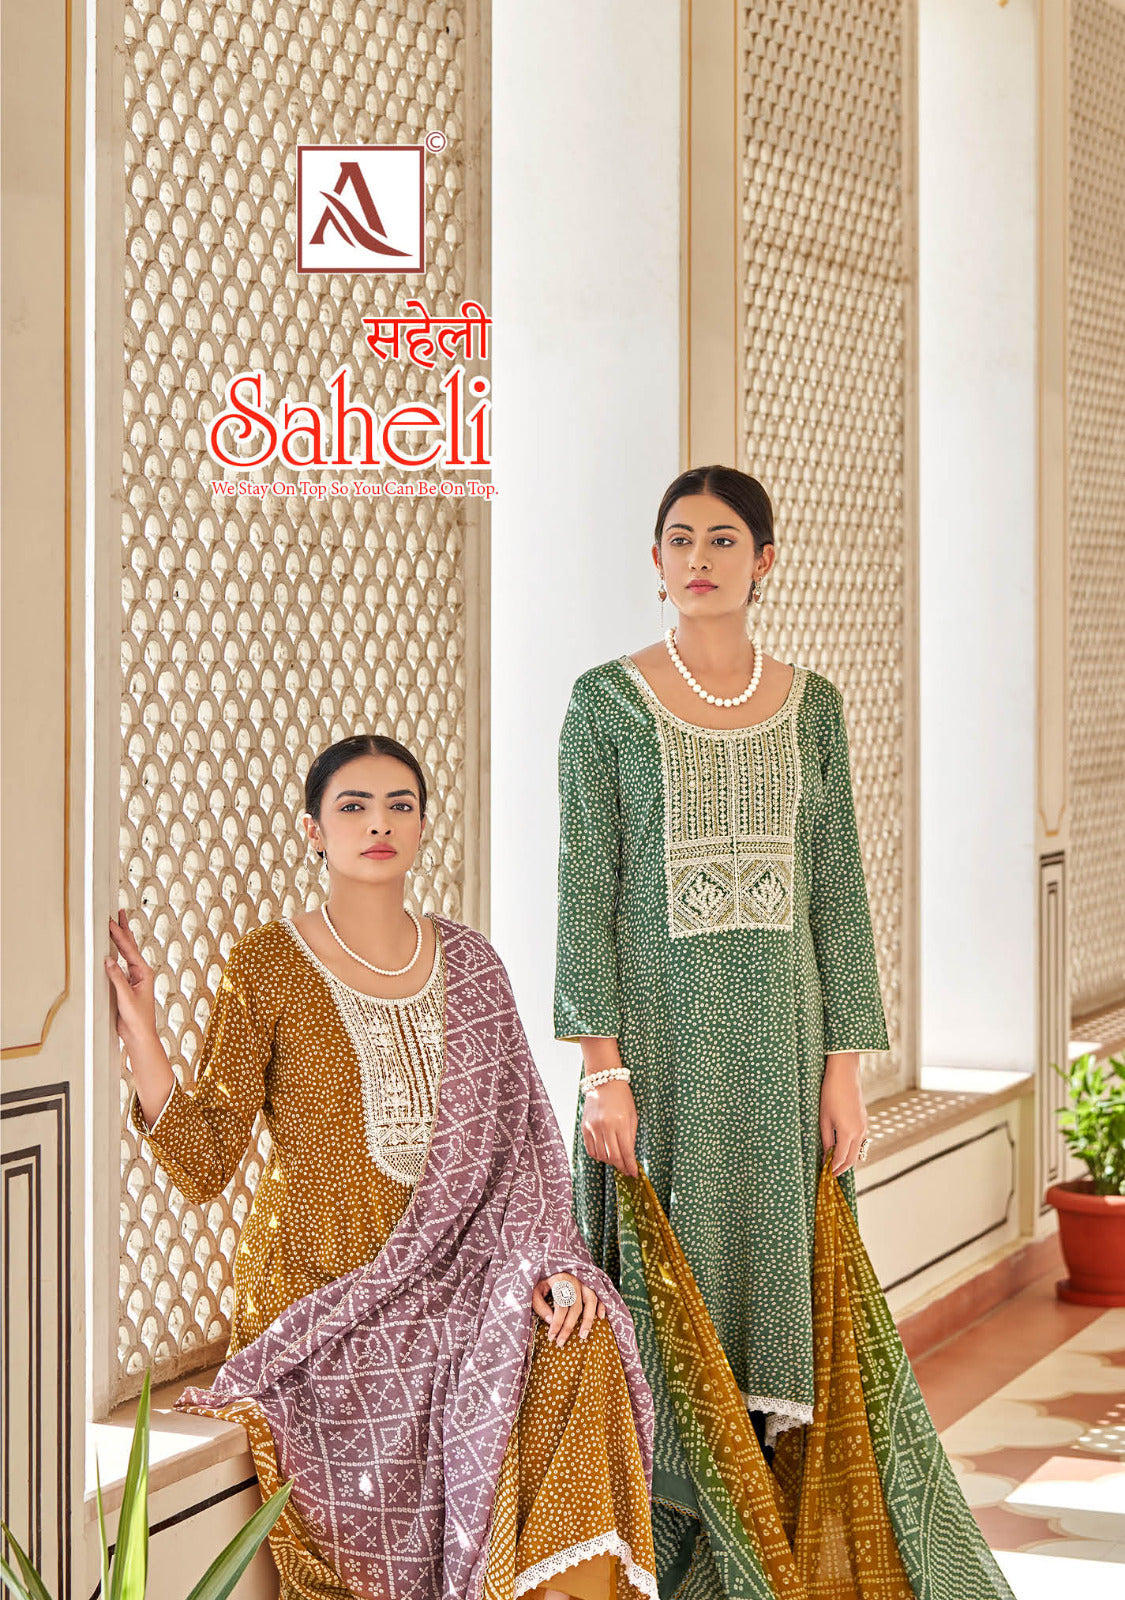 Alok Suit Saheli Viscose Rayon With Embroidery Work Salwar Suit Latest Collection